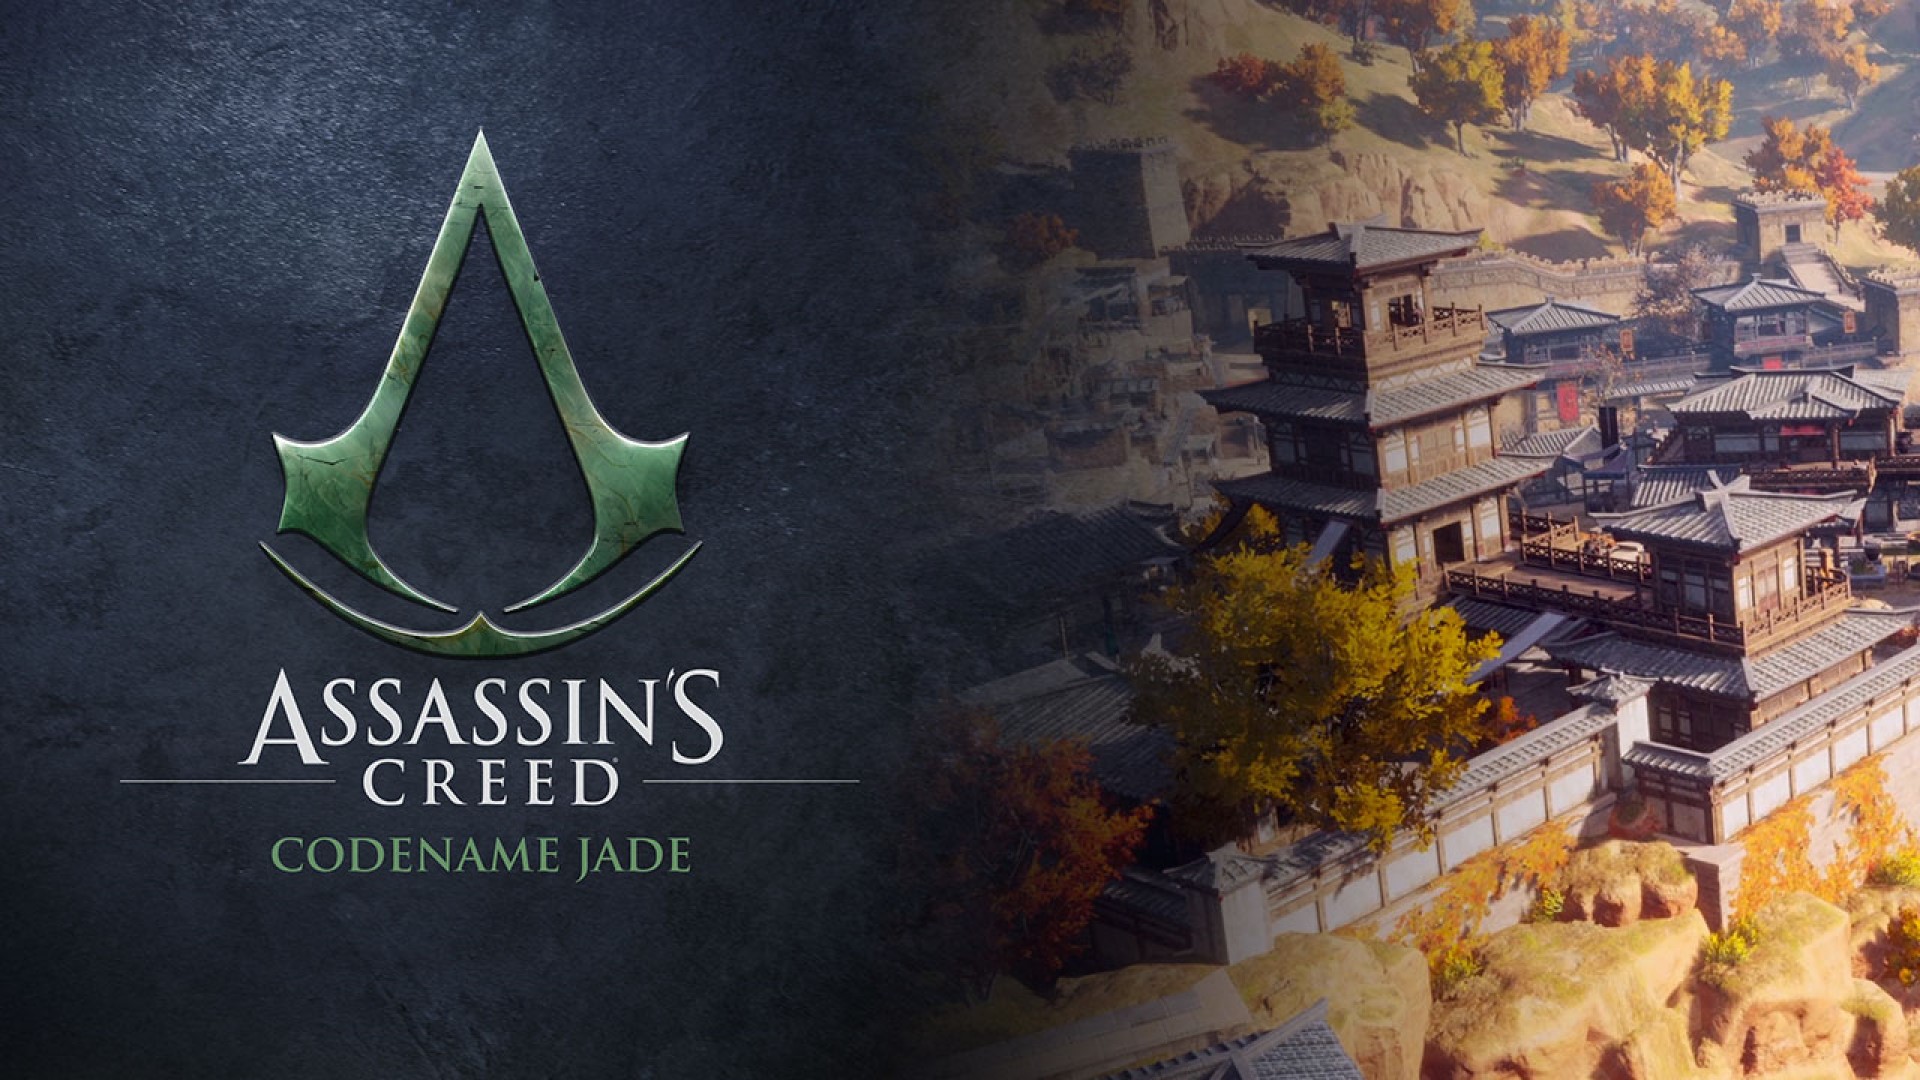 Assassin's Creed Codename Jade is an Open World Game Coming to Mobile